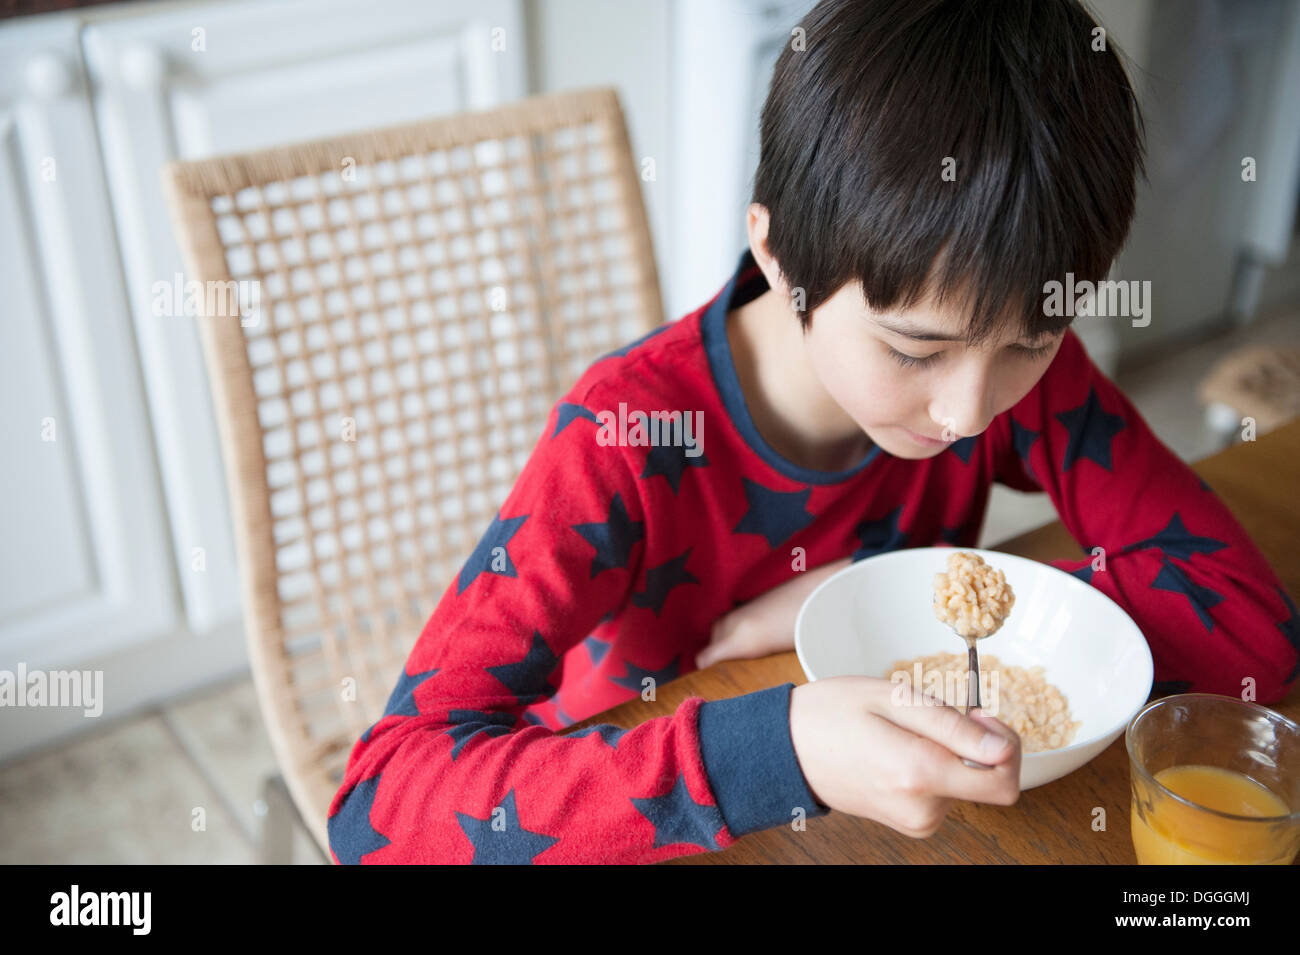 Boy eating breakfast cereal at table Stock Photo